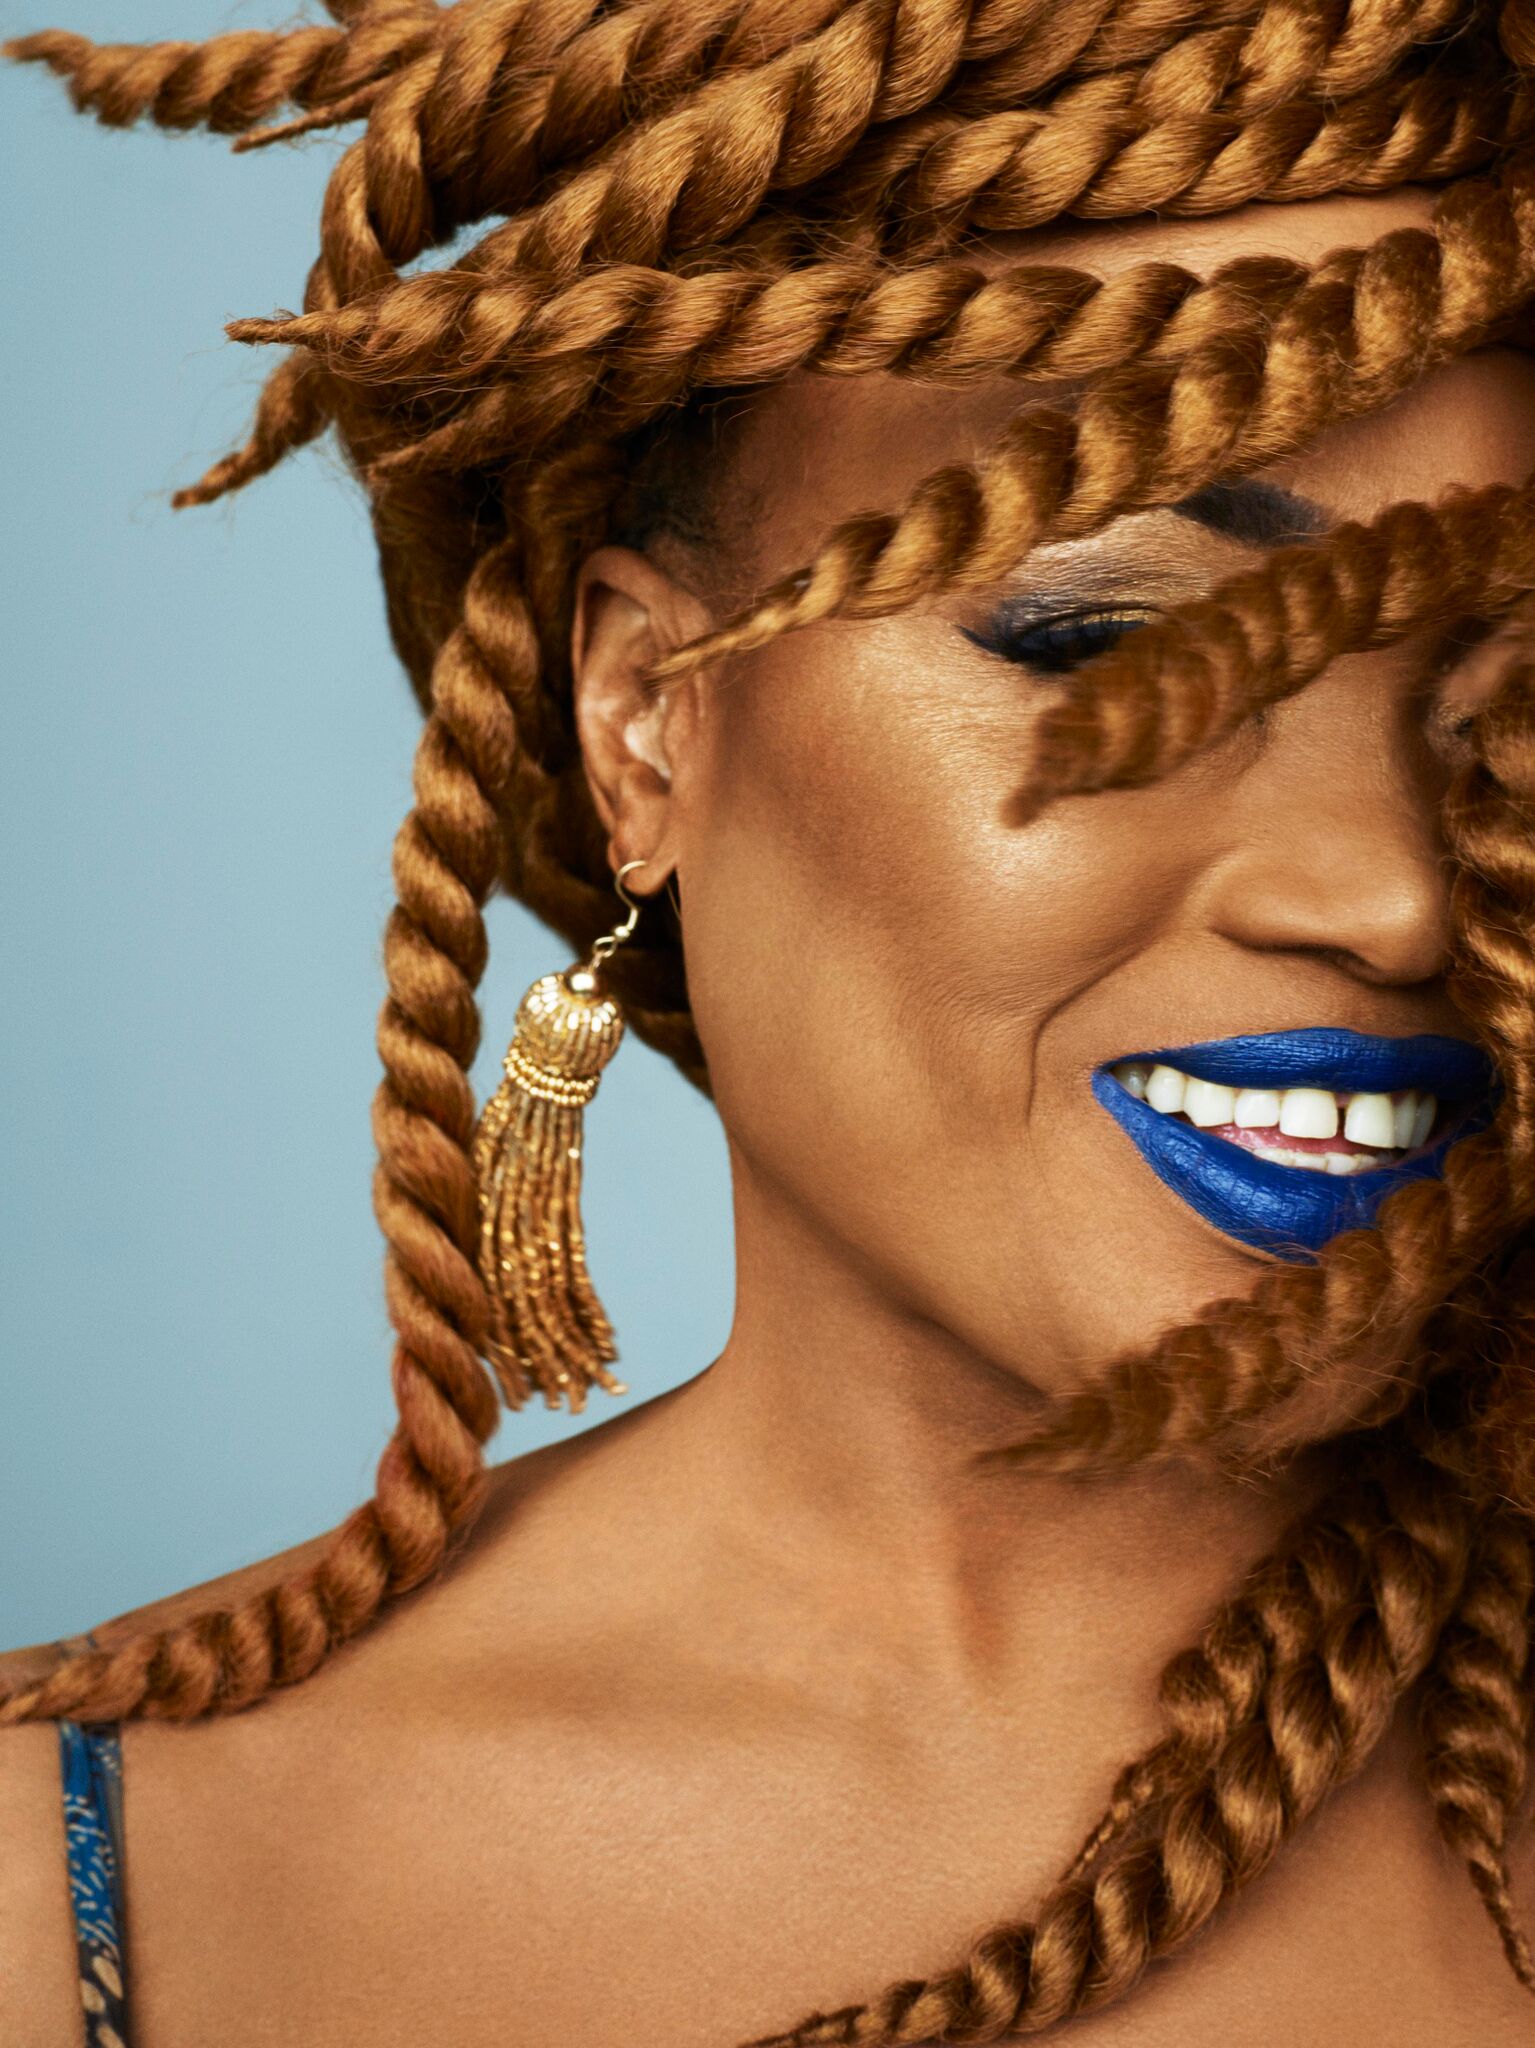 Oumou Sangaré pairs music with activism on ‘Mogoya’